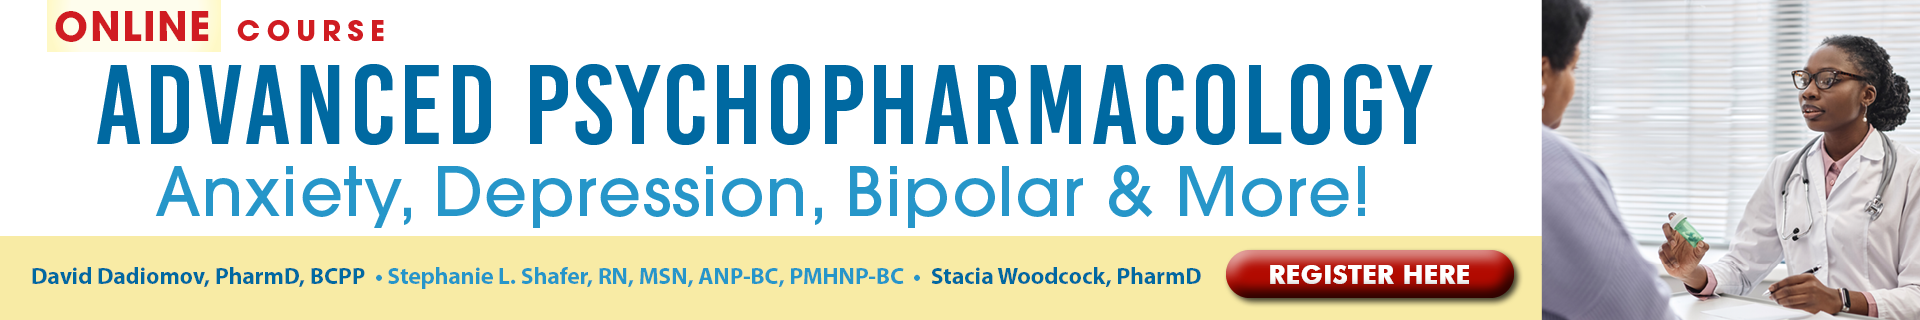 Advanced Psychopharmacology Online Course: Anxiety, Depression, Bipolar & More!